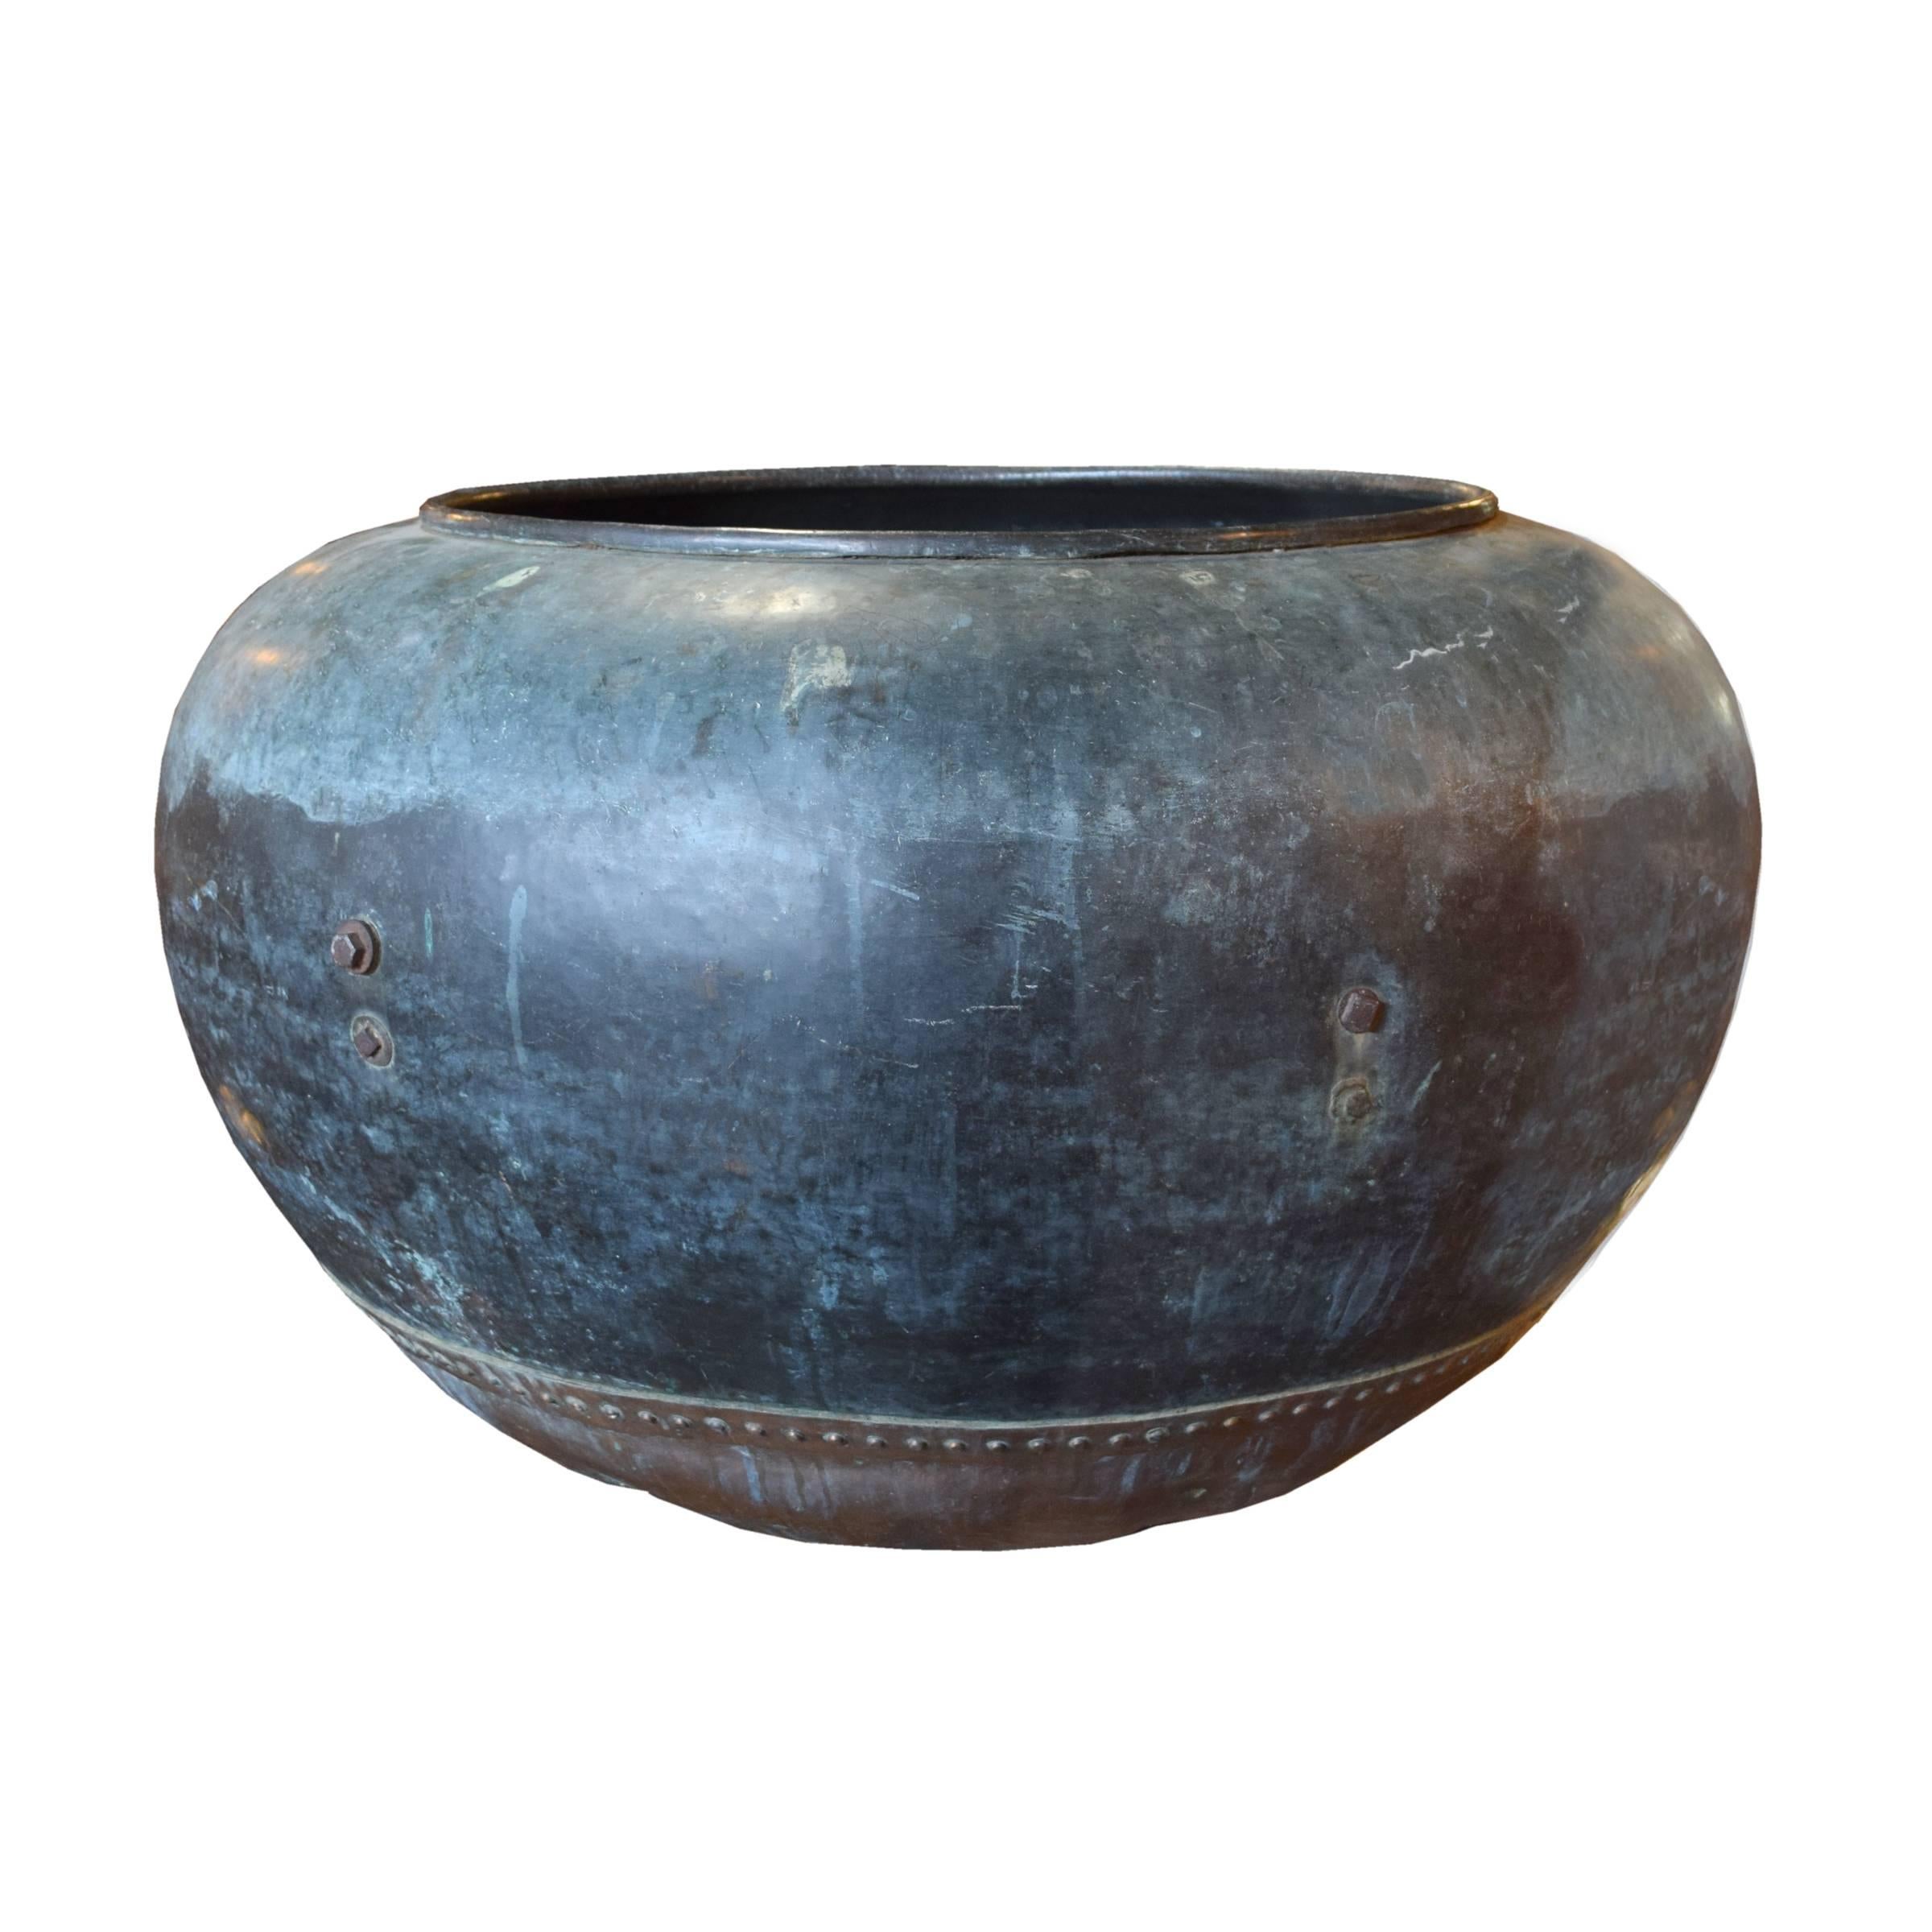 The best French oversize copper vessel with a riveted double bottom and incredible patina.